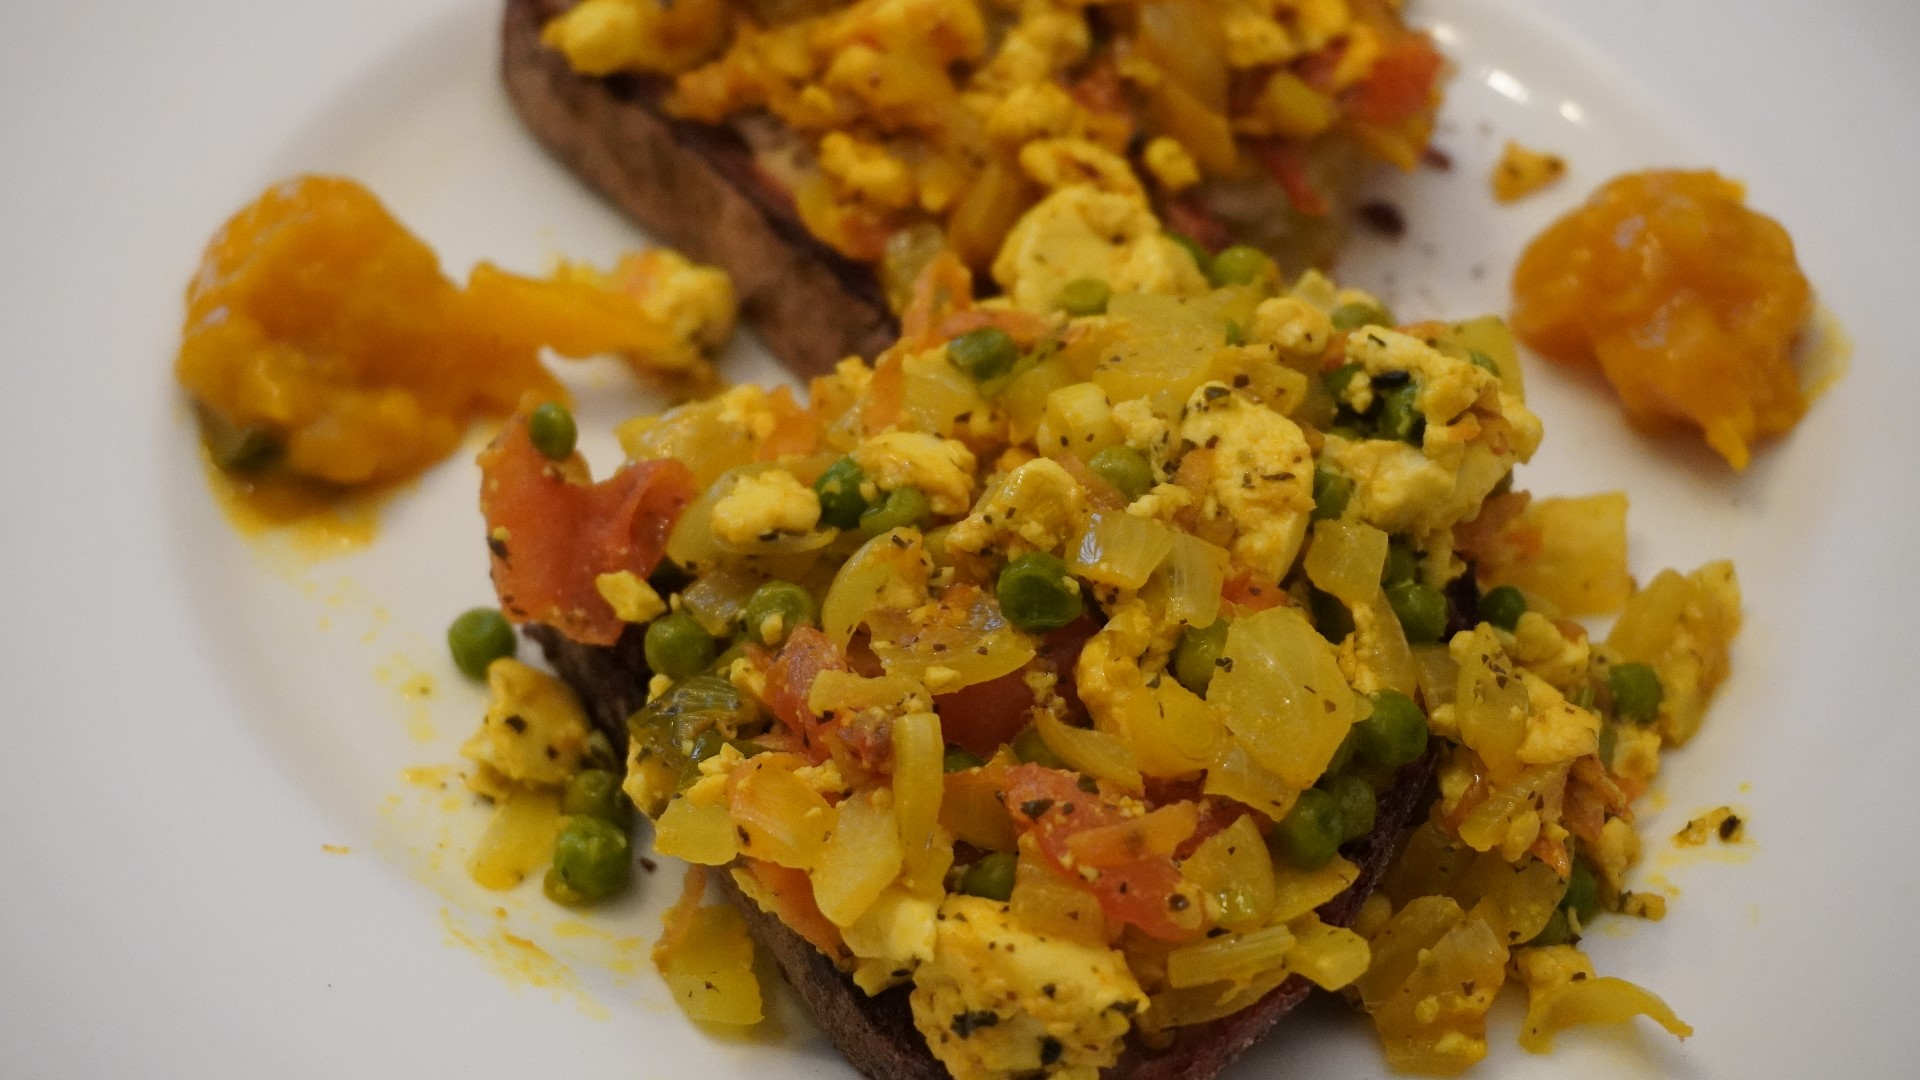 Peggy Brusseau of Contented Vegan whips up this versatile breakfast scramble that you can add whatever you like. #newdaynw